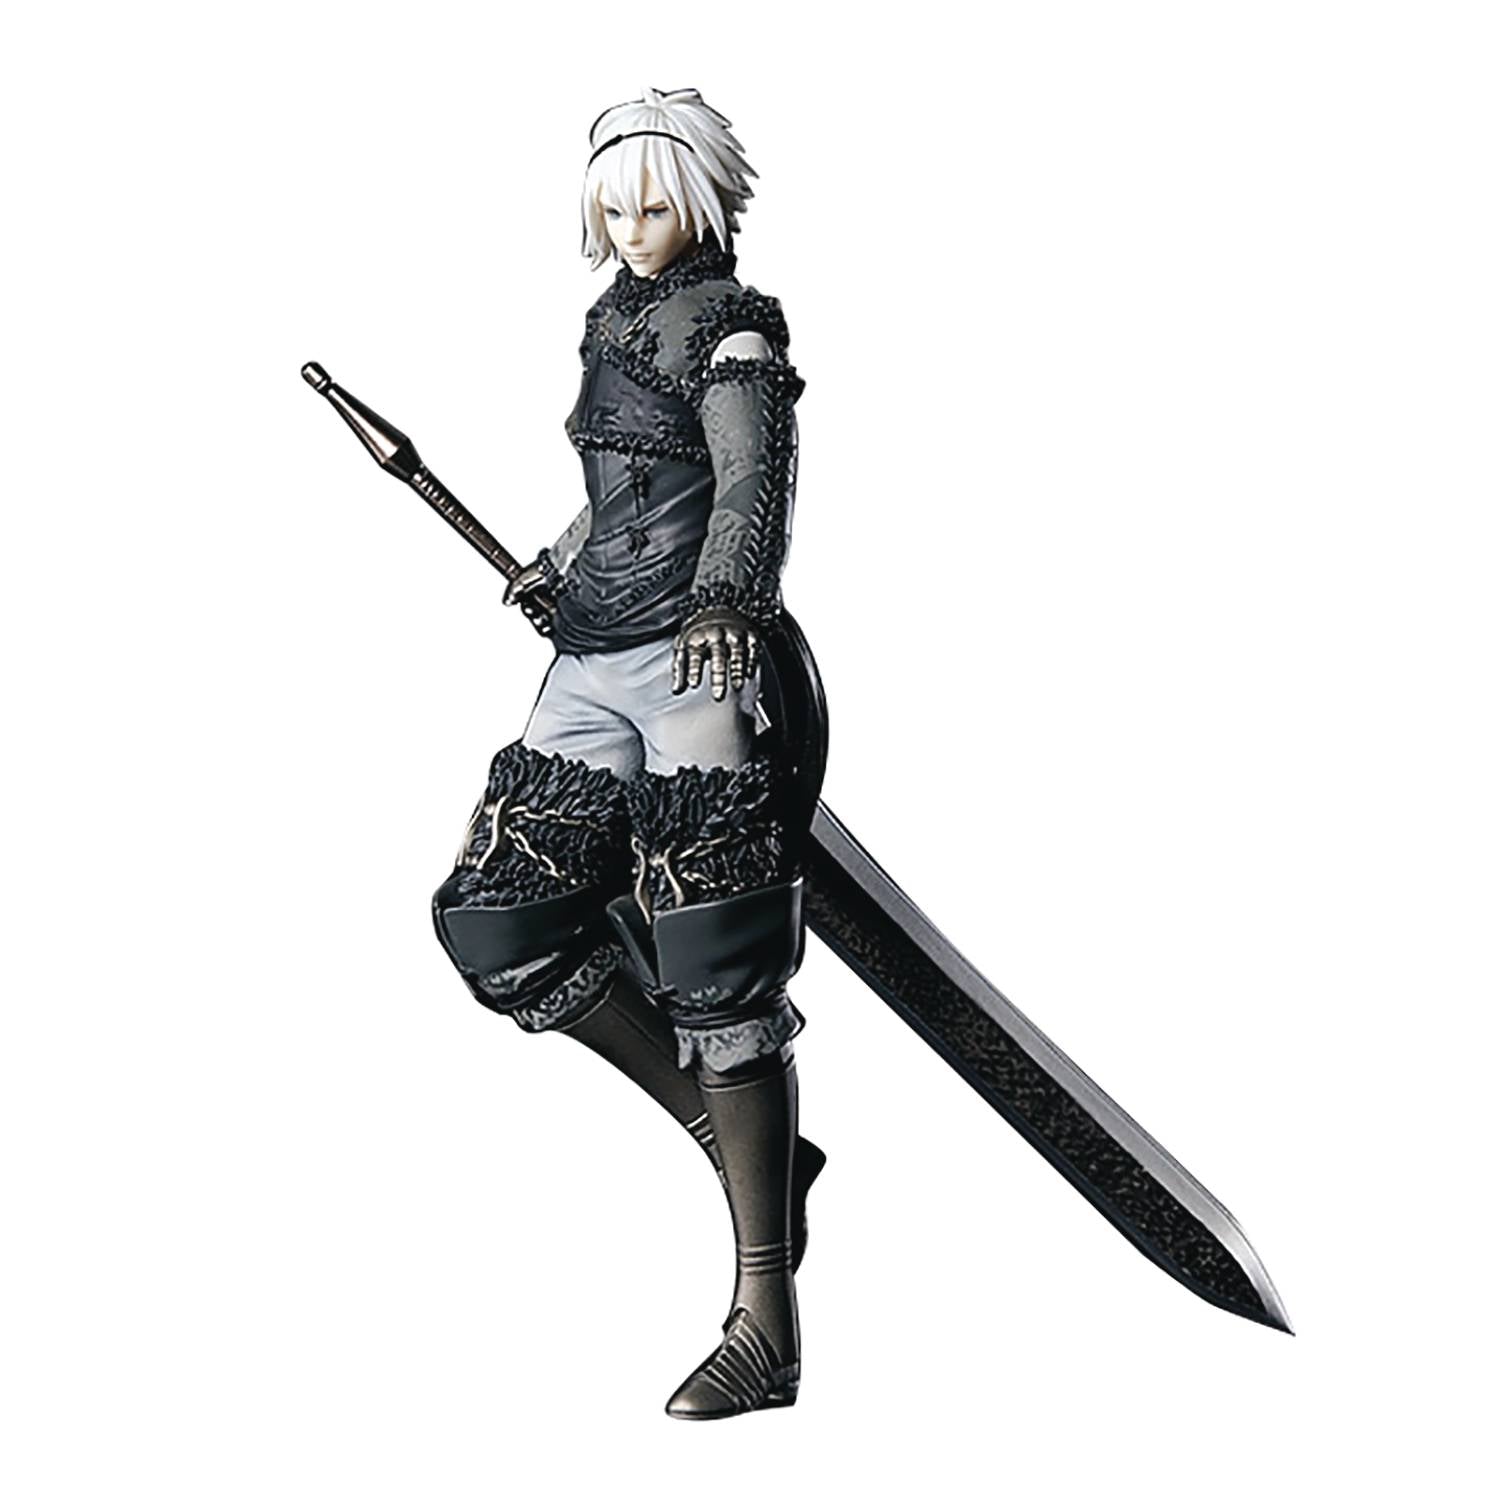 NieR: Automata 2B Statuette (Beastlord Weapon, White Outfit